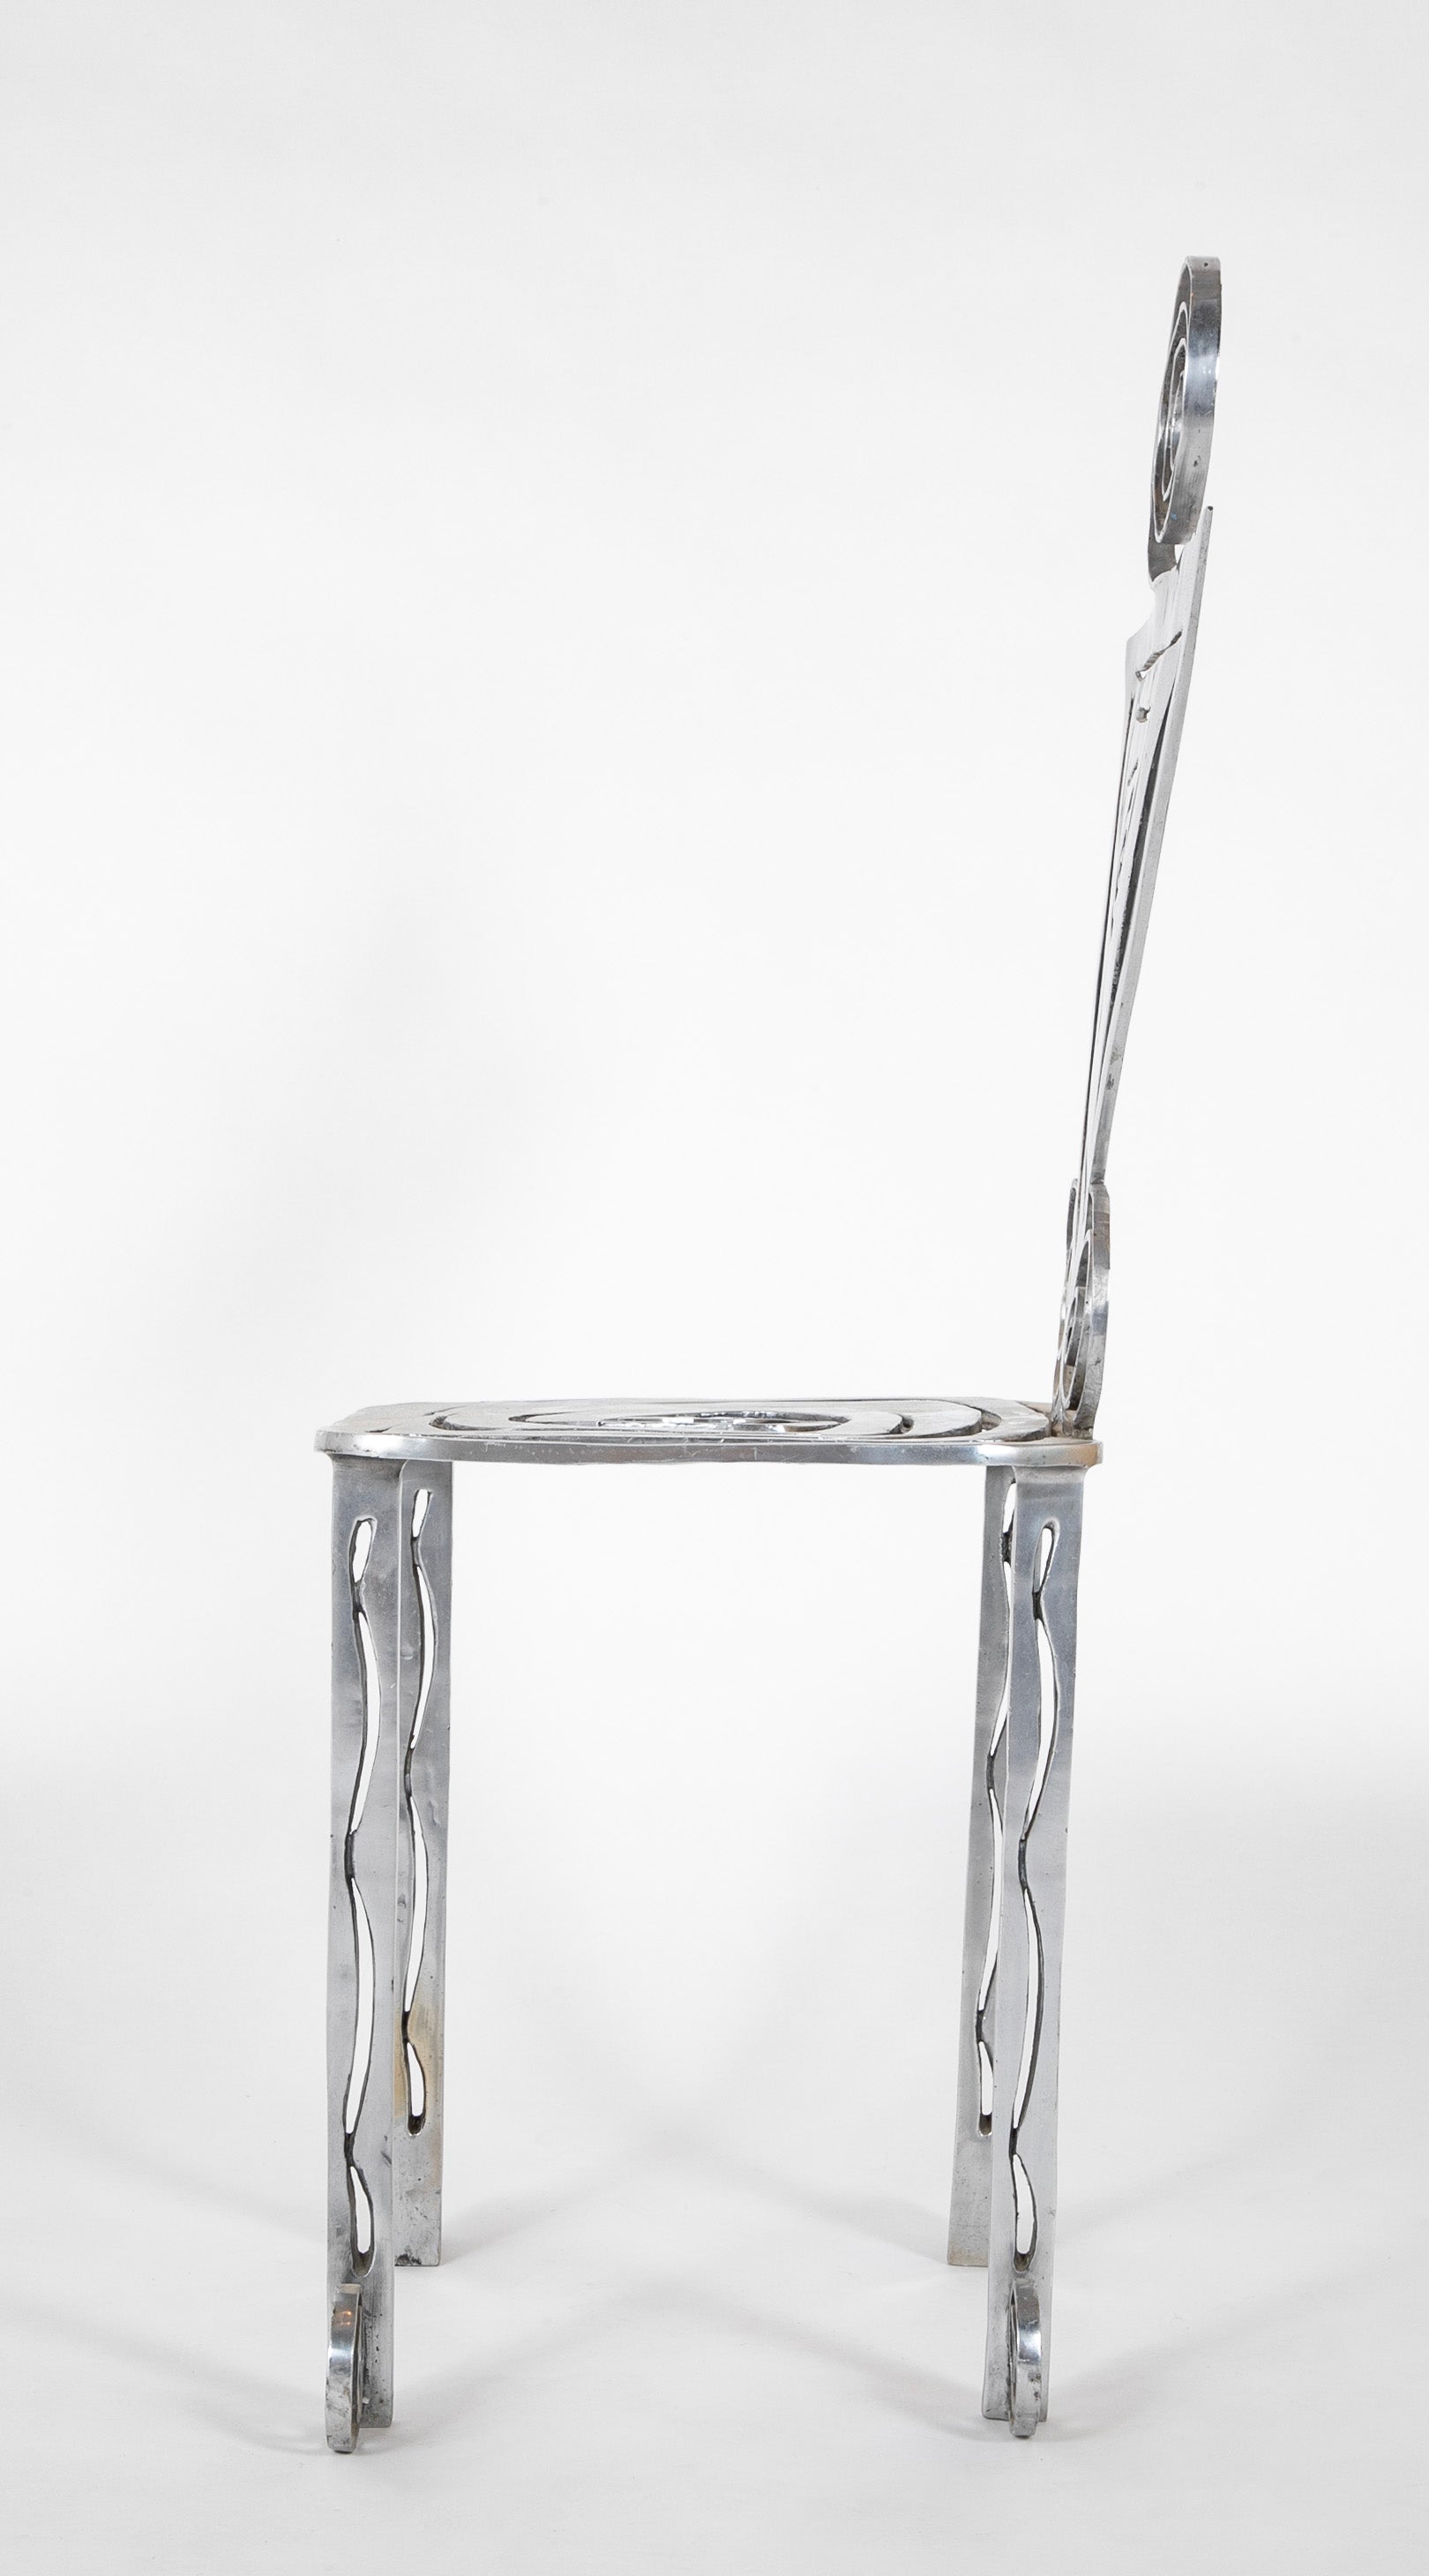 A Sculptural Side Chair of Aluminum by Toby Heller